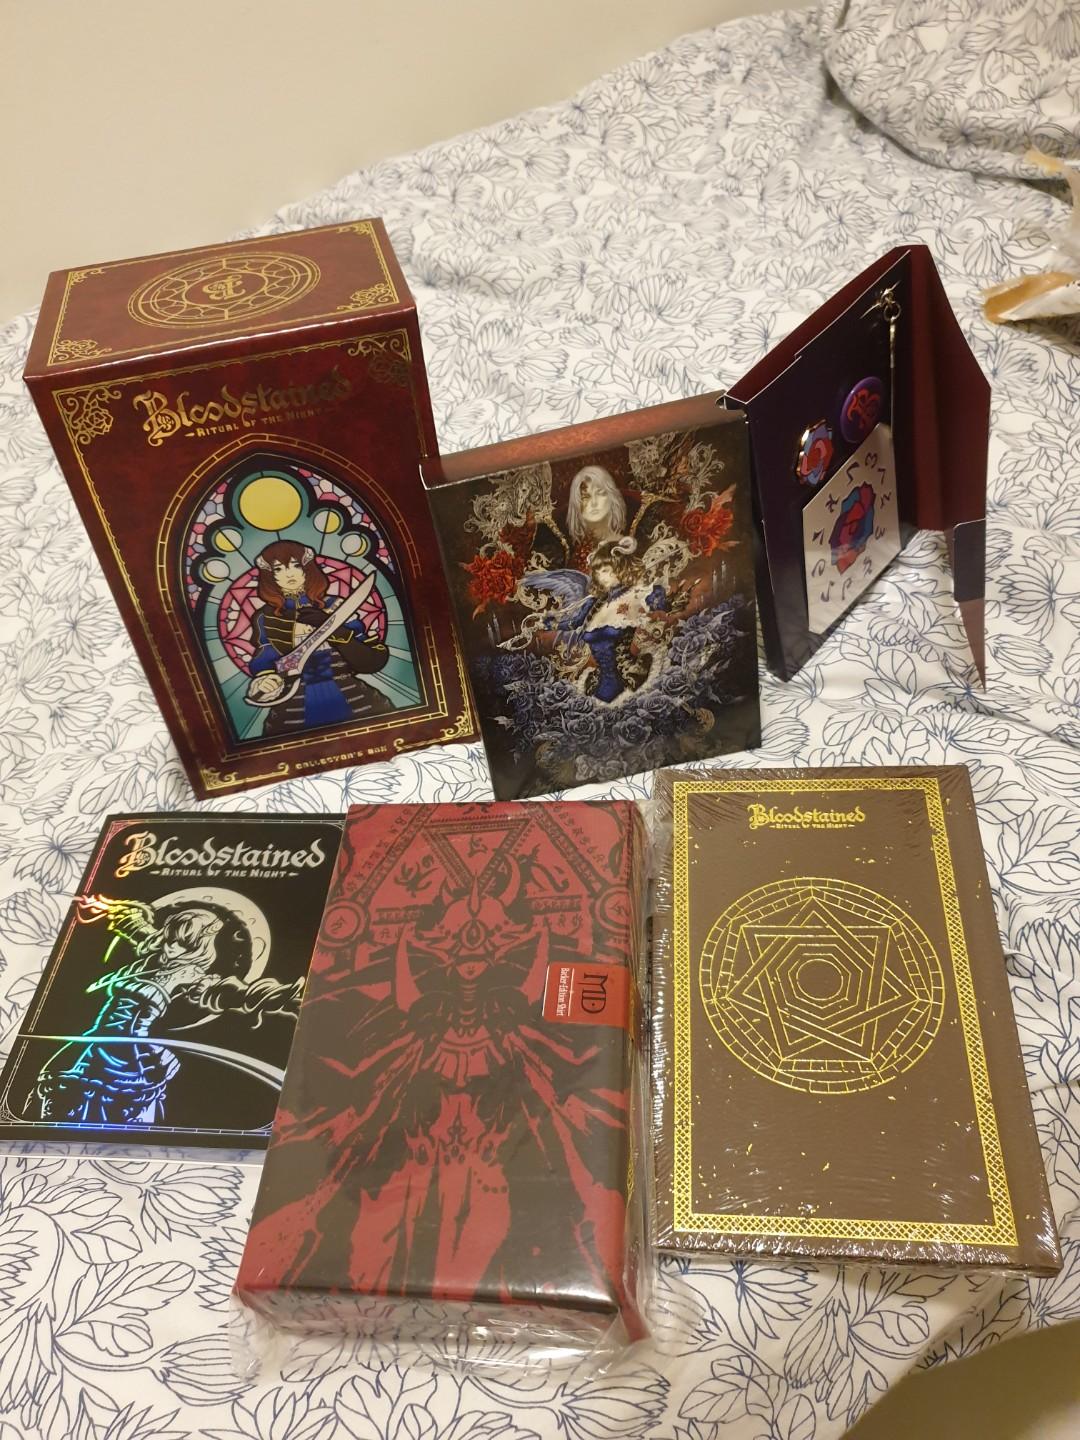 Bloodstained キックスターター コレクターズBOX-